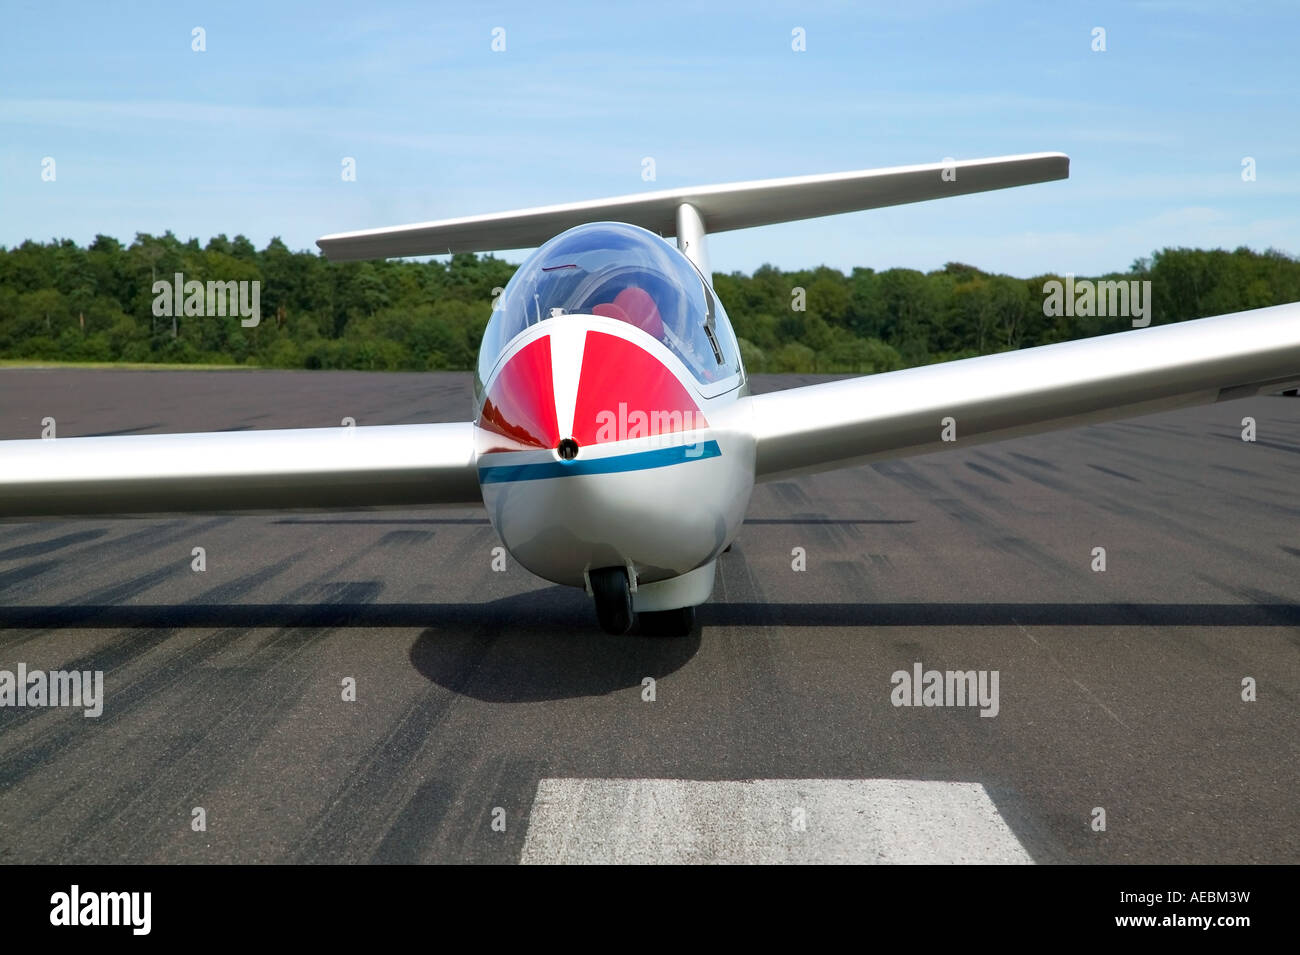 Glider at rest on a tarmac runway Stock Photo